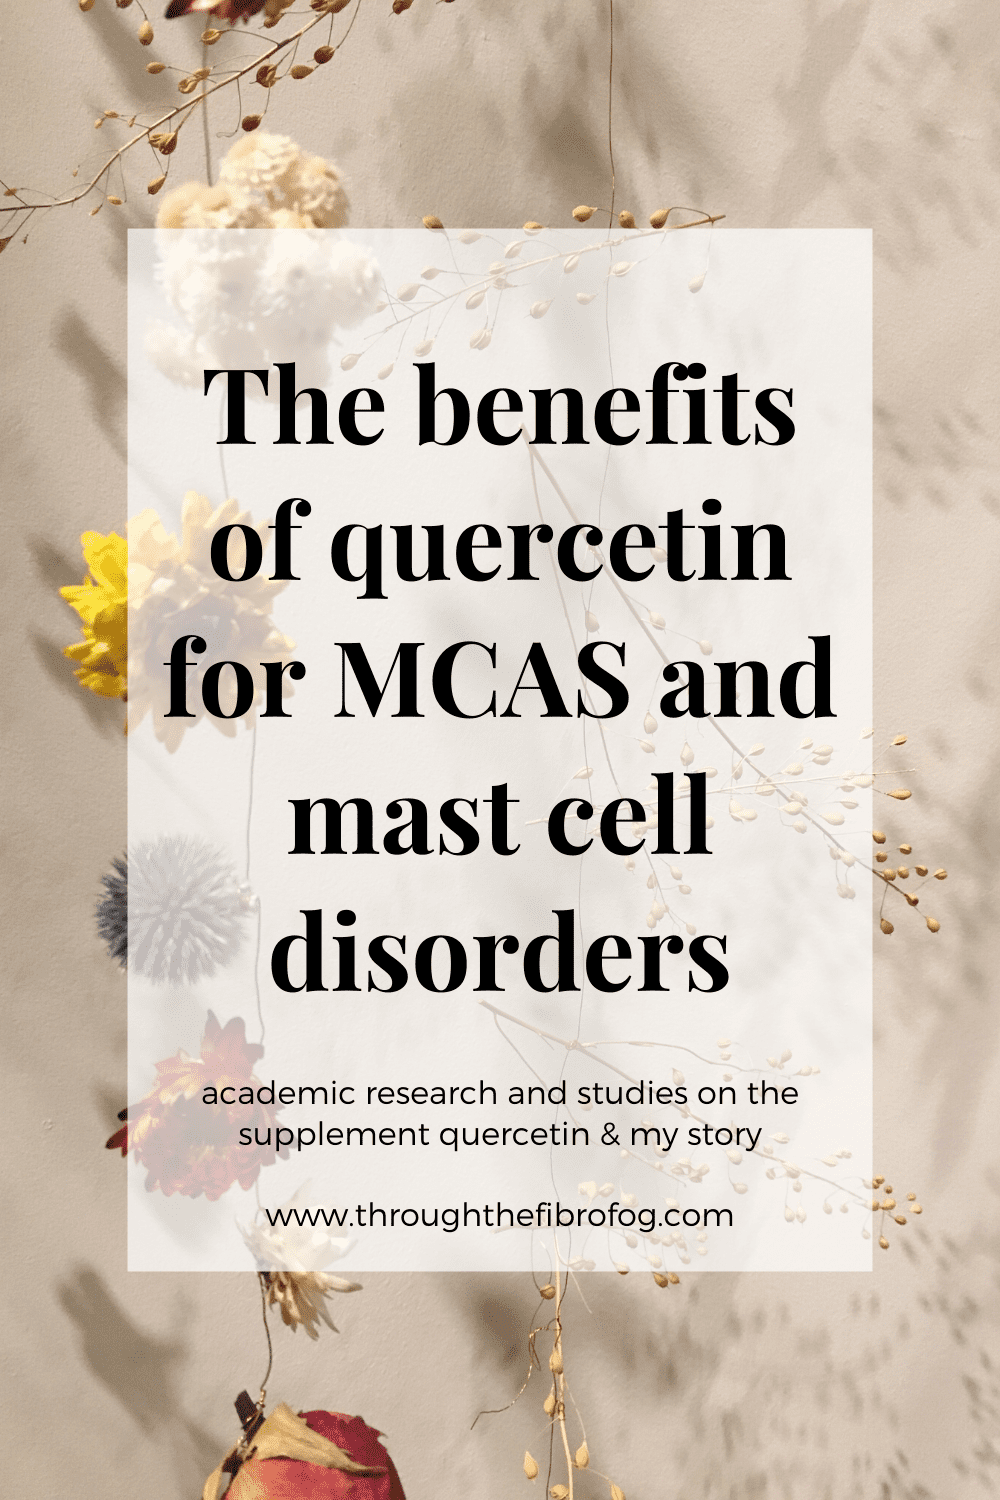 The benefits of quercetin for those with MCAS , mast